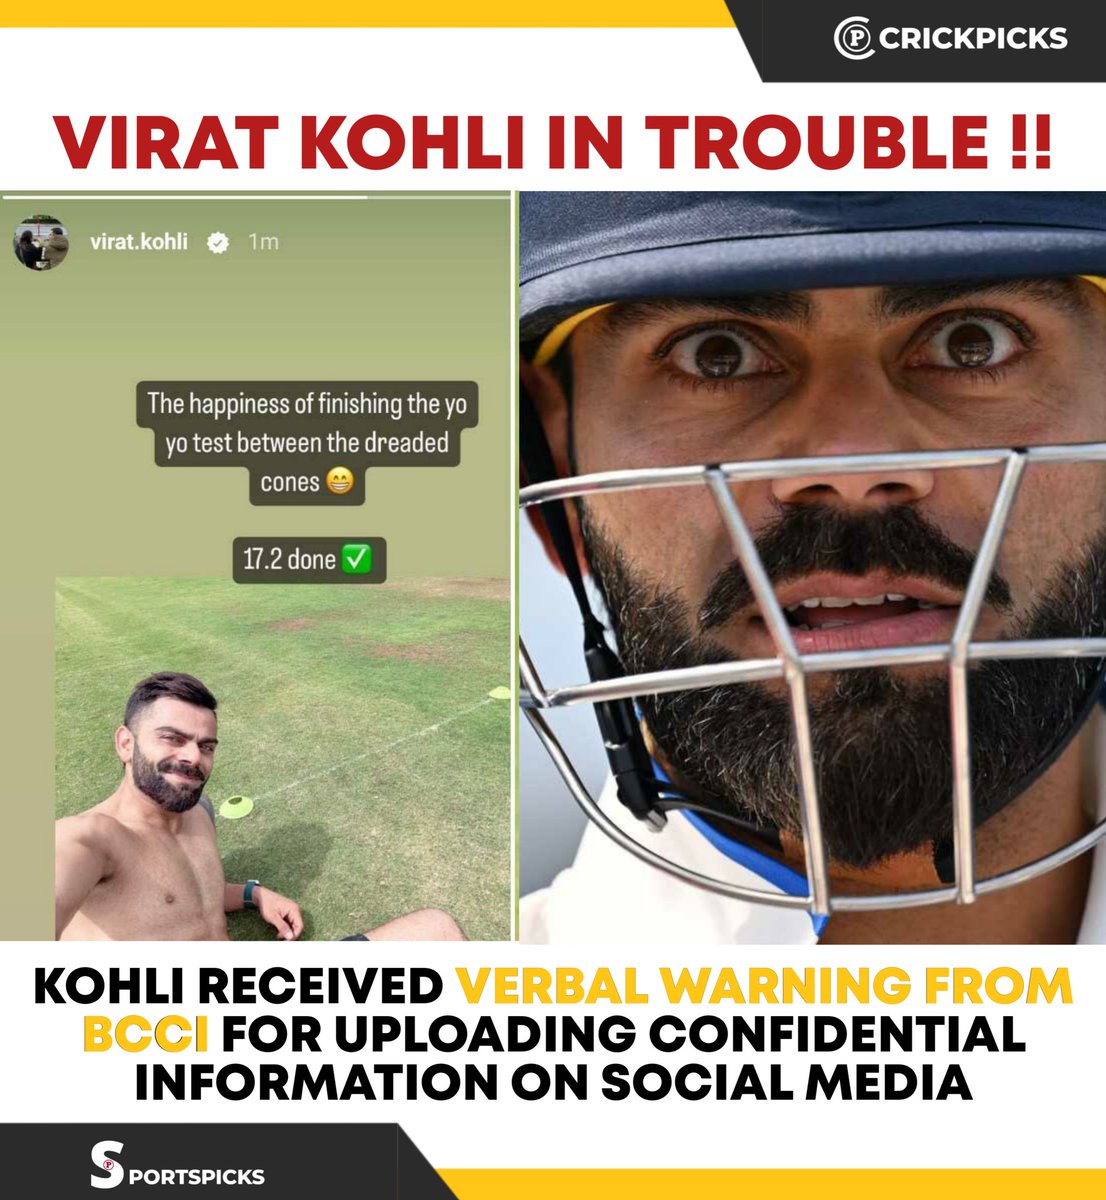 This is how BCCi treats their players 😔
..

#CricketTwitter    #RohitSharma𓃵 #ViratKohli #ViratKohli𓃵 #RohitSharma #WIvsIND #WIvIND #WorldCup2023 #CWC2023  #AsiaCup2023 #Asiangames #CricketWorldCup #WC2023 #INDvPAK #INDvsWI #BCCI #shameOnbcci #IndianCricket